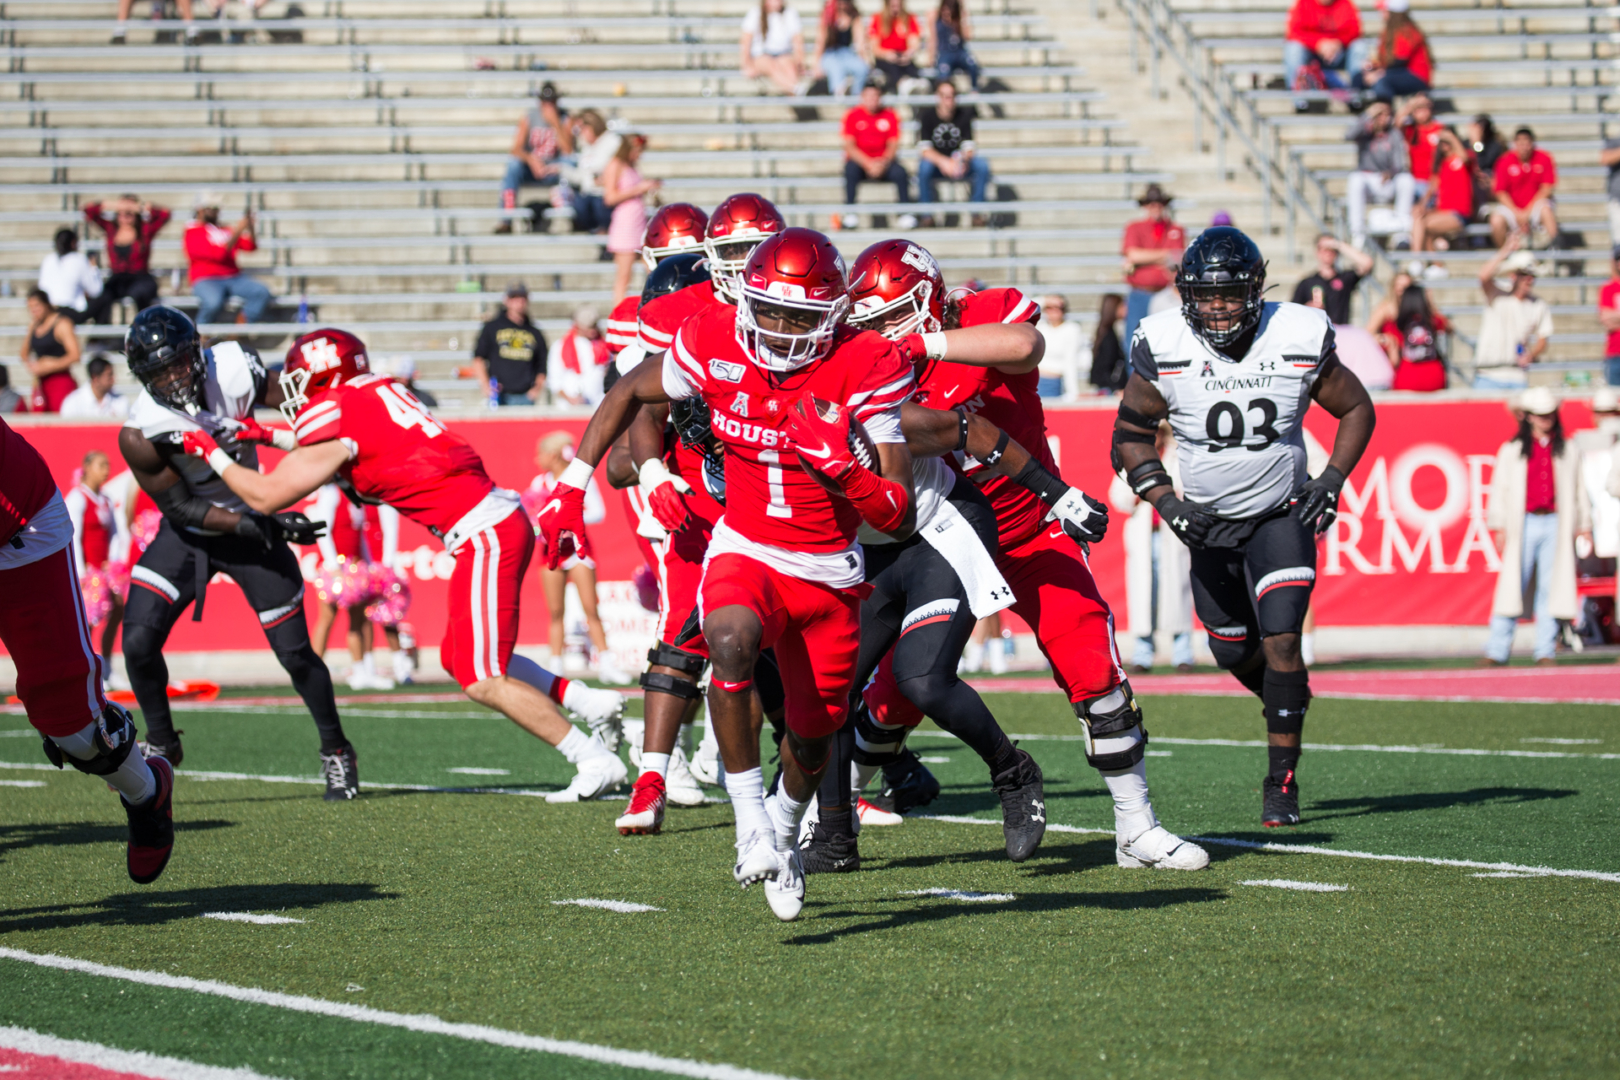 Junior receiver Bryson Smith runs with the ball in Houston's 2019 matchup against Cincinnati. Smith will have a chance to step up with senior receiver Marquez Stevenson out. | File Photo